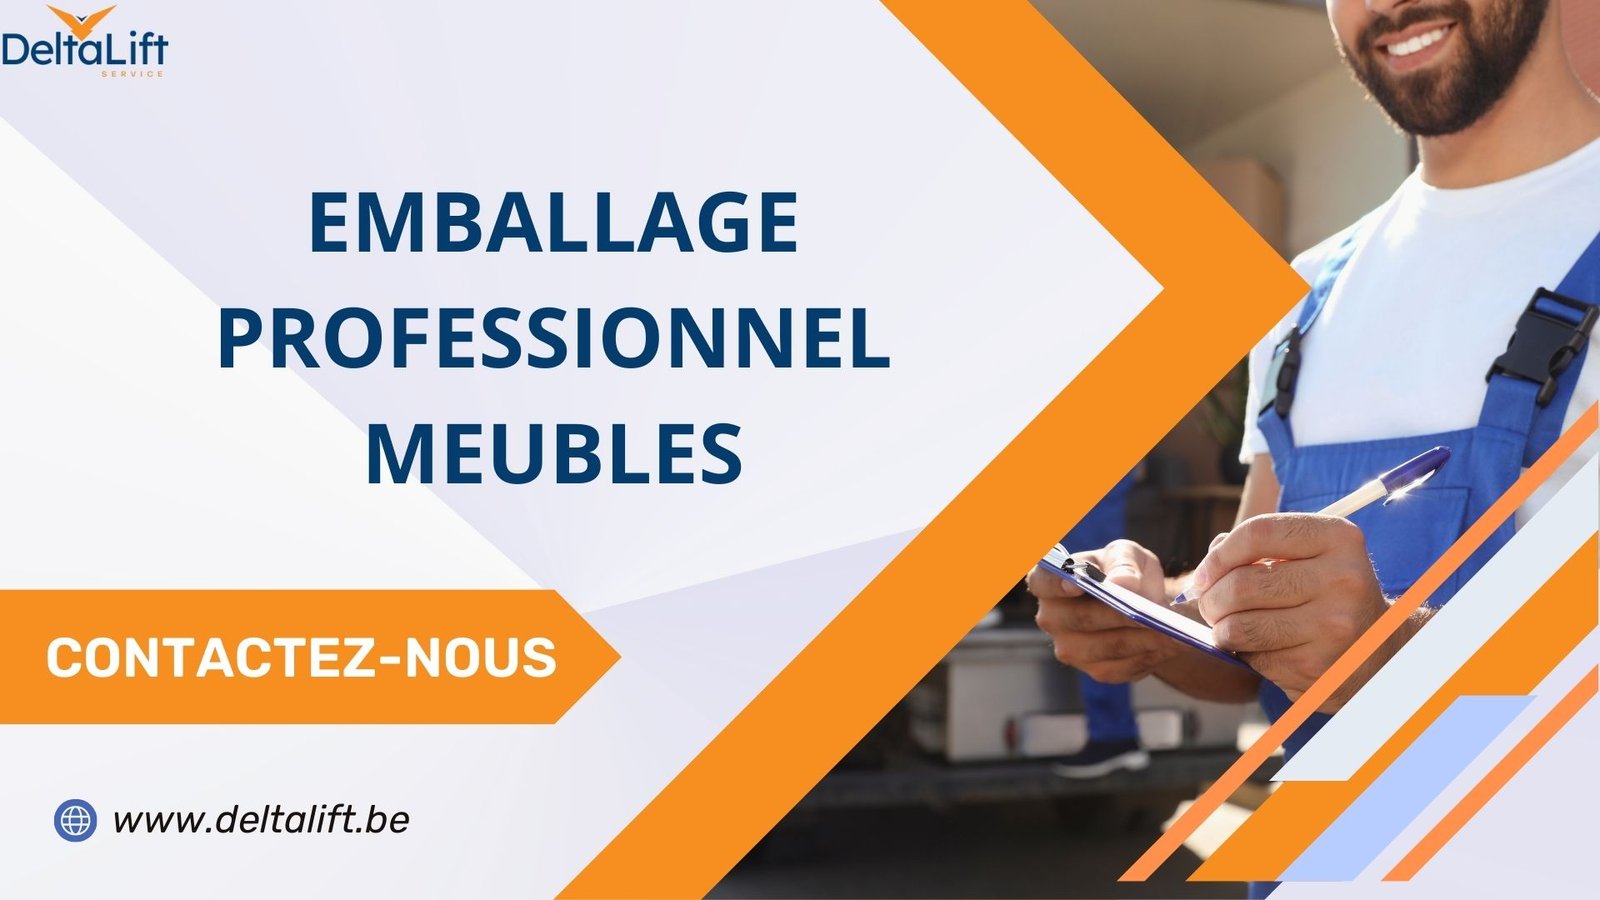 Emballage professionnel meubles